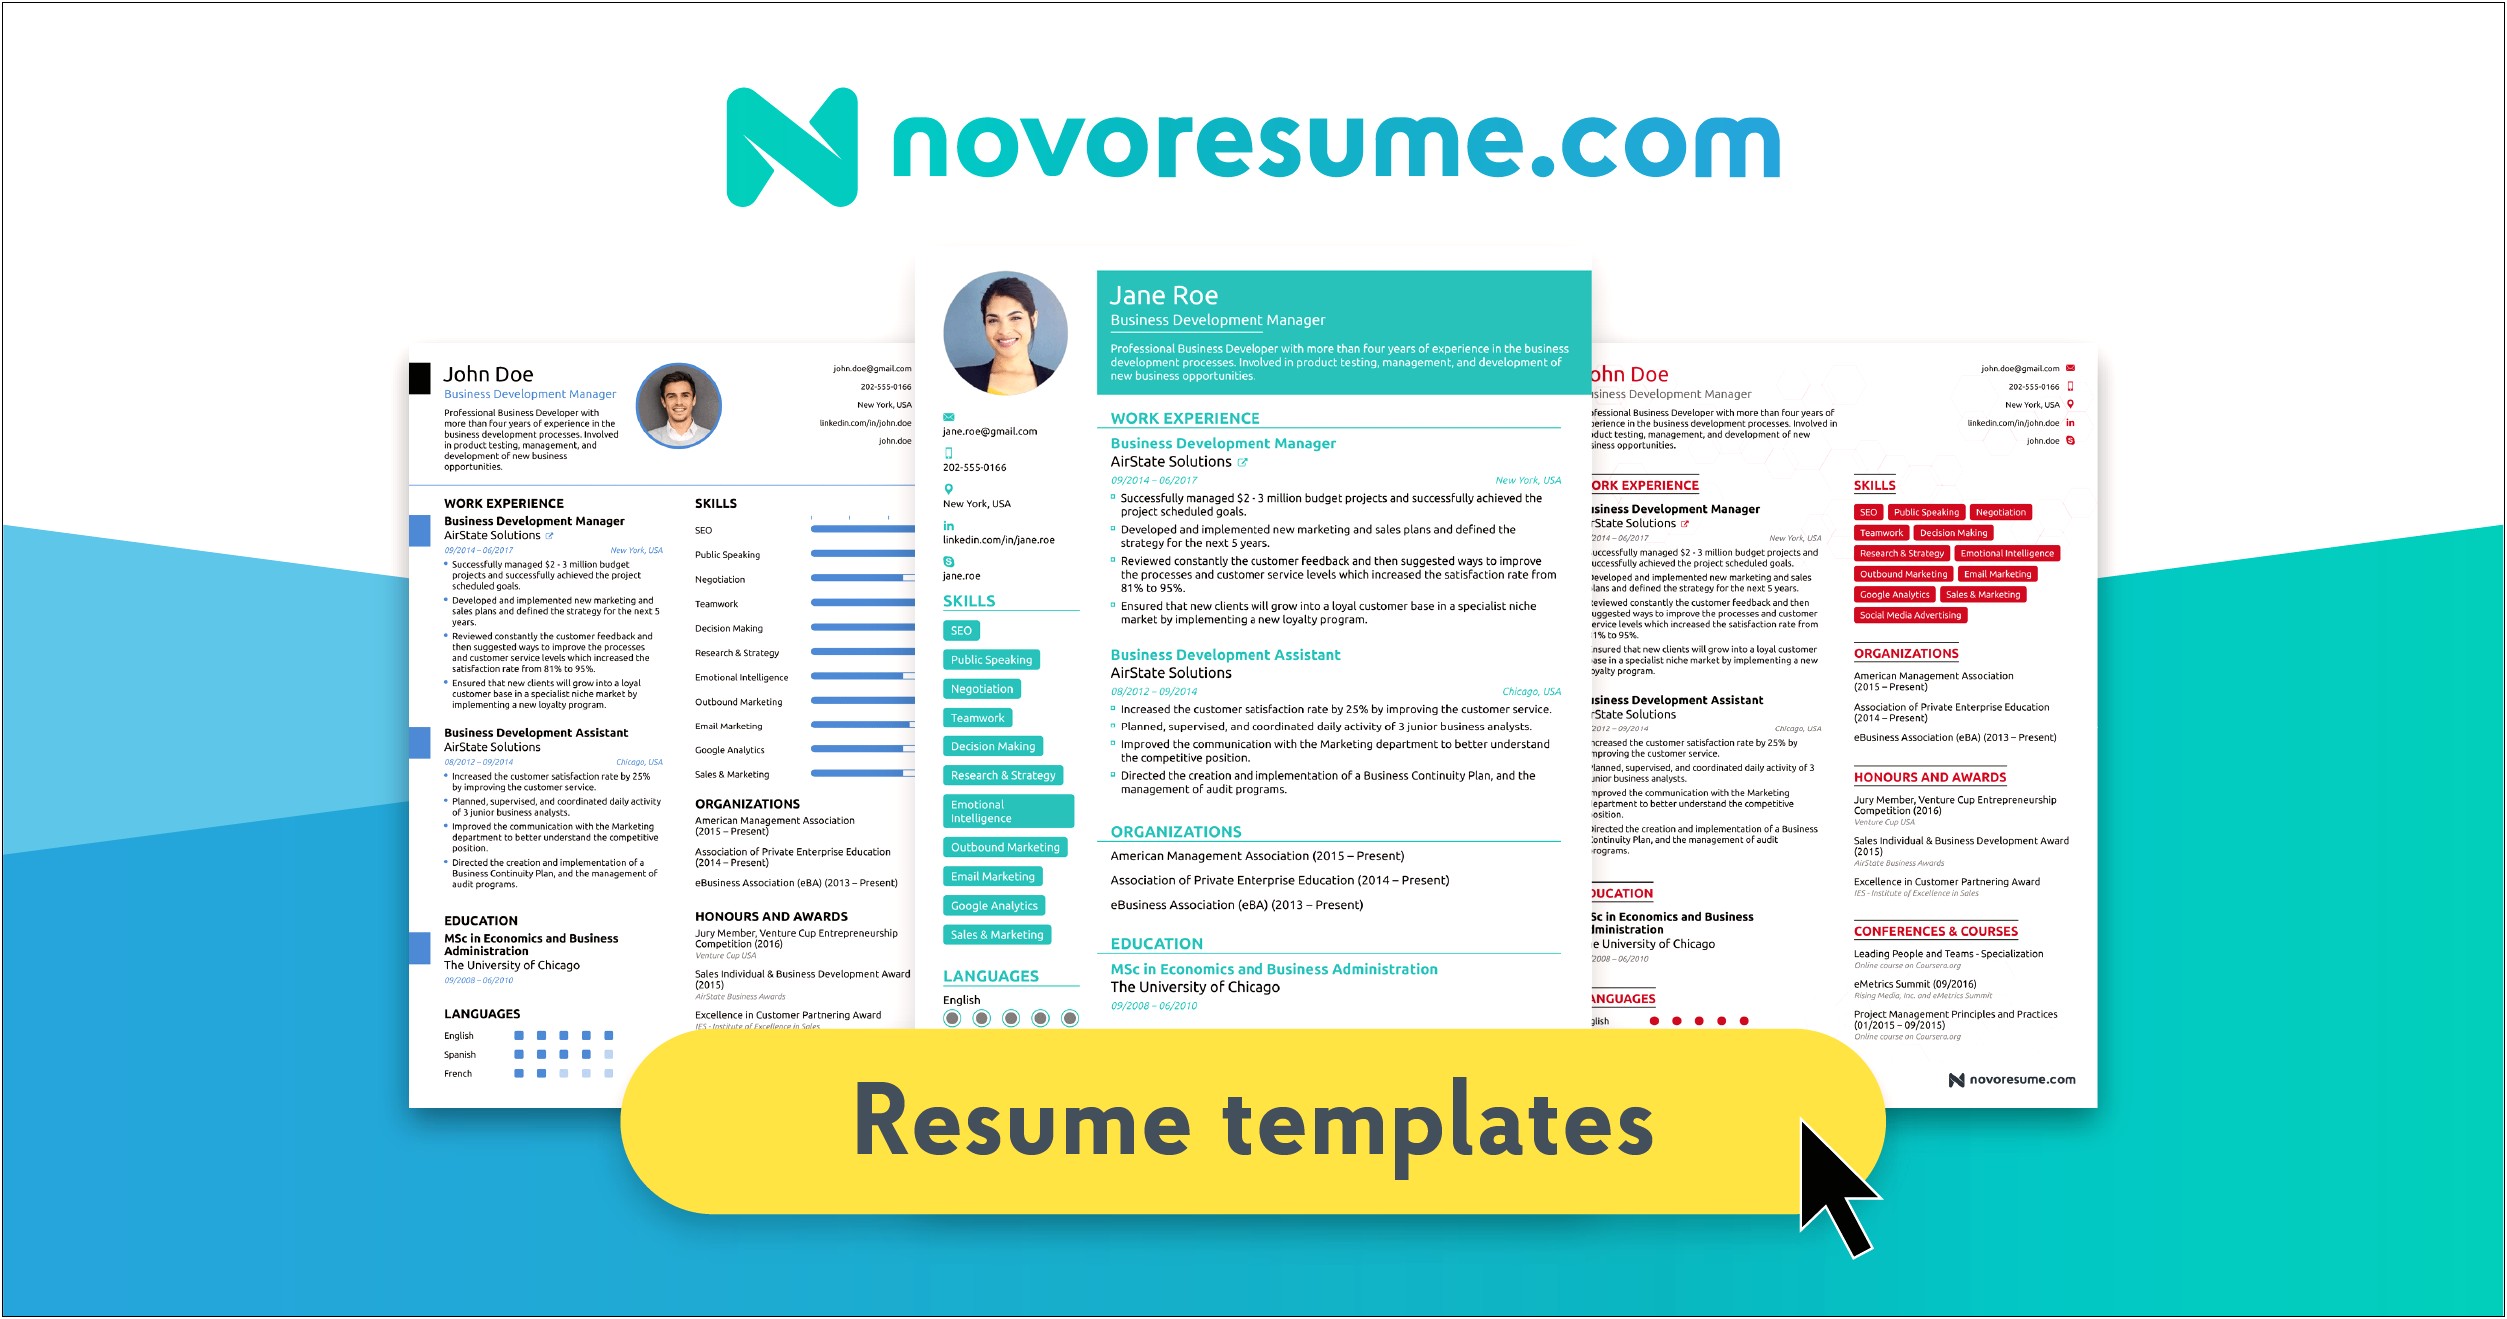 Resume Samples That Stand Out